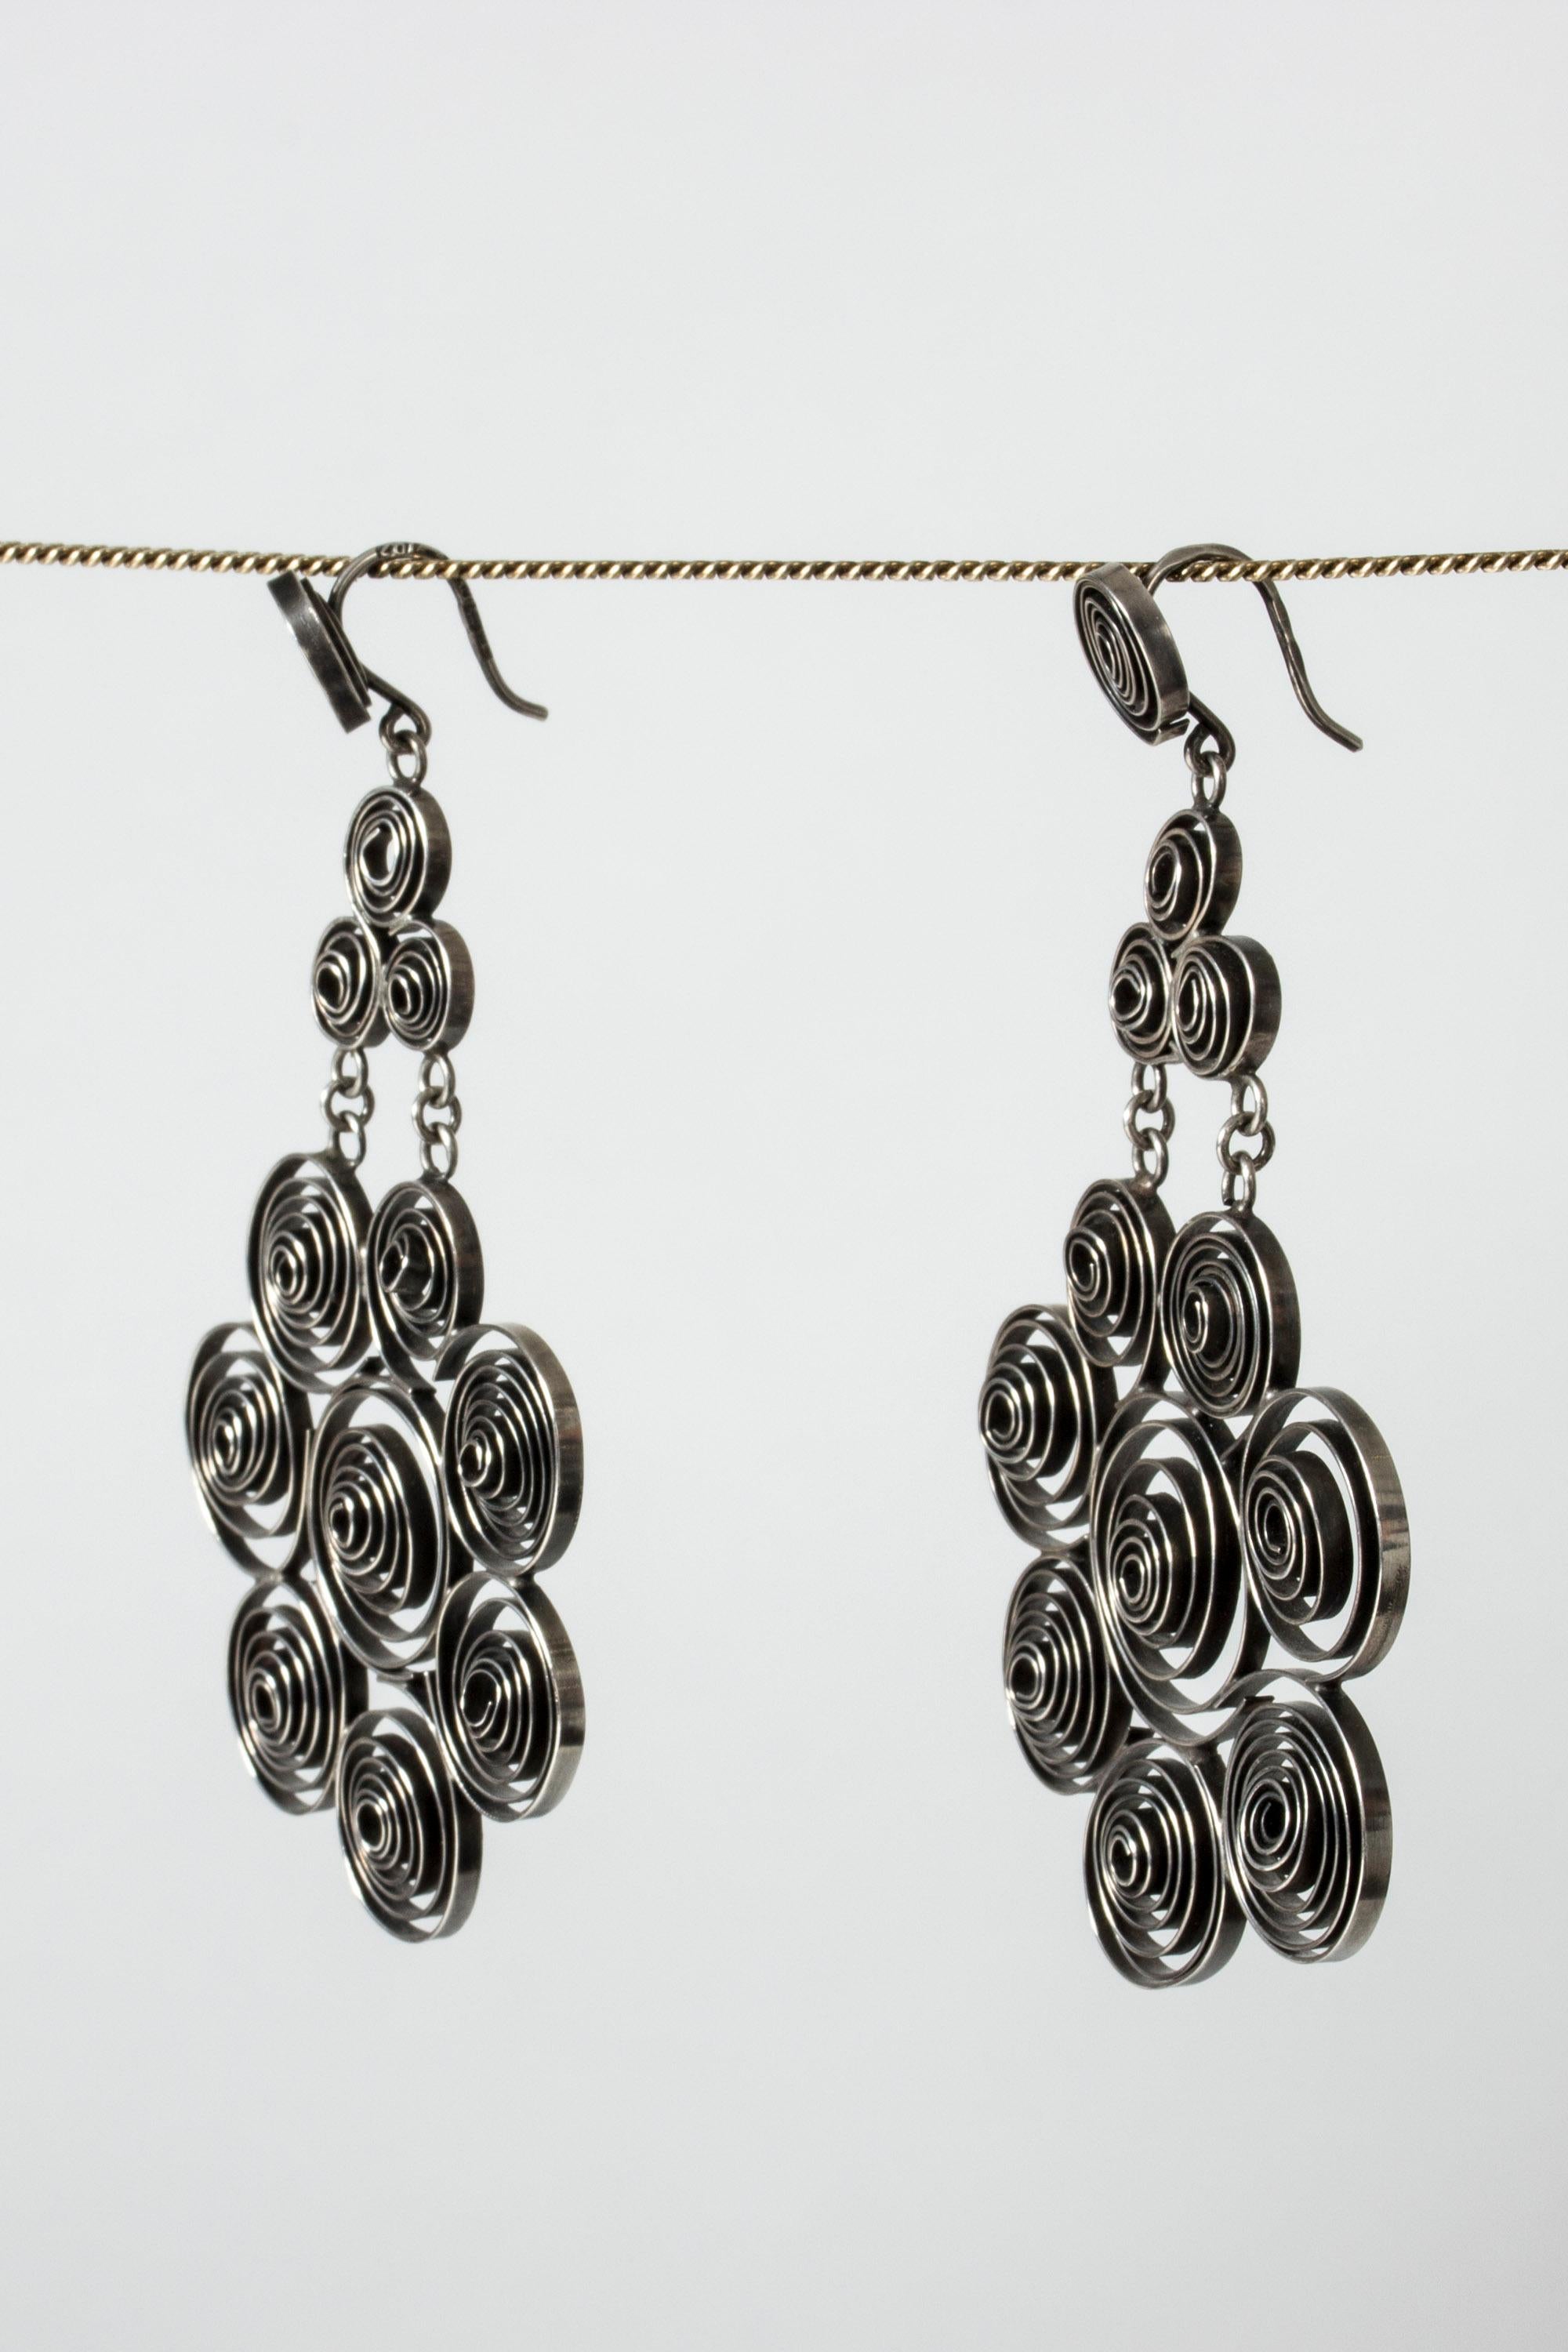 Pair of silver earrings by Liisa Vitali, in an early version of the “Kissantassu” (“Cat paw”) series which was taken into serial production by the firm Nils Westerback in the 1970s. Created from silver ribbons twisted into spheres. Heavy quality.